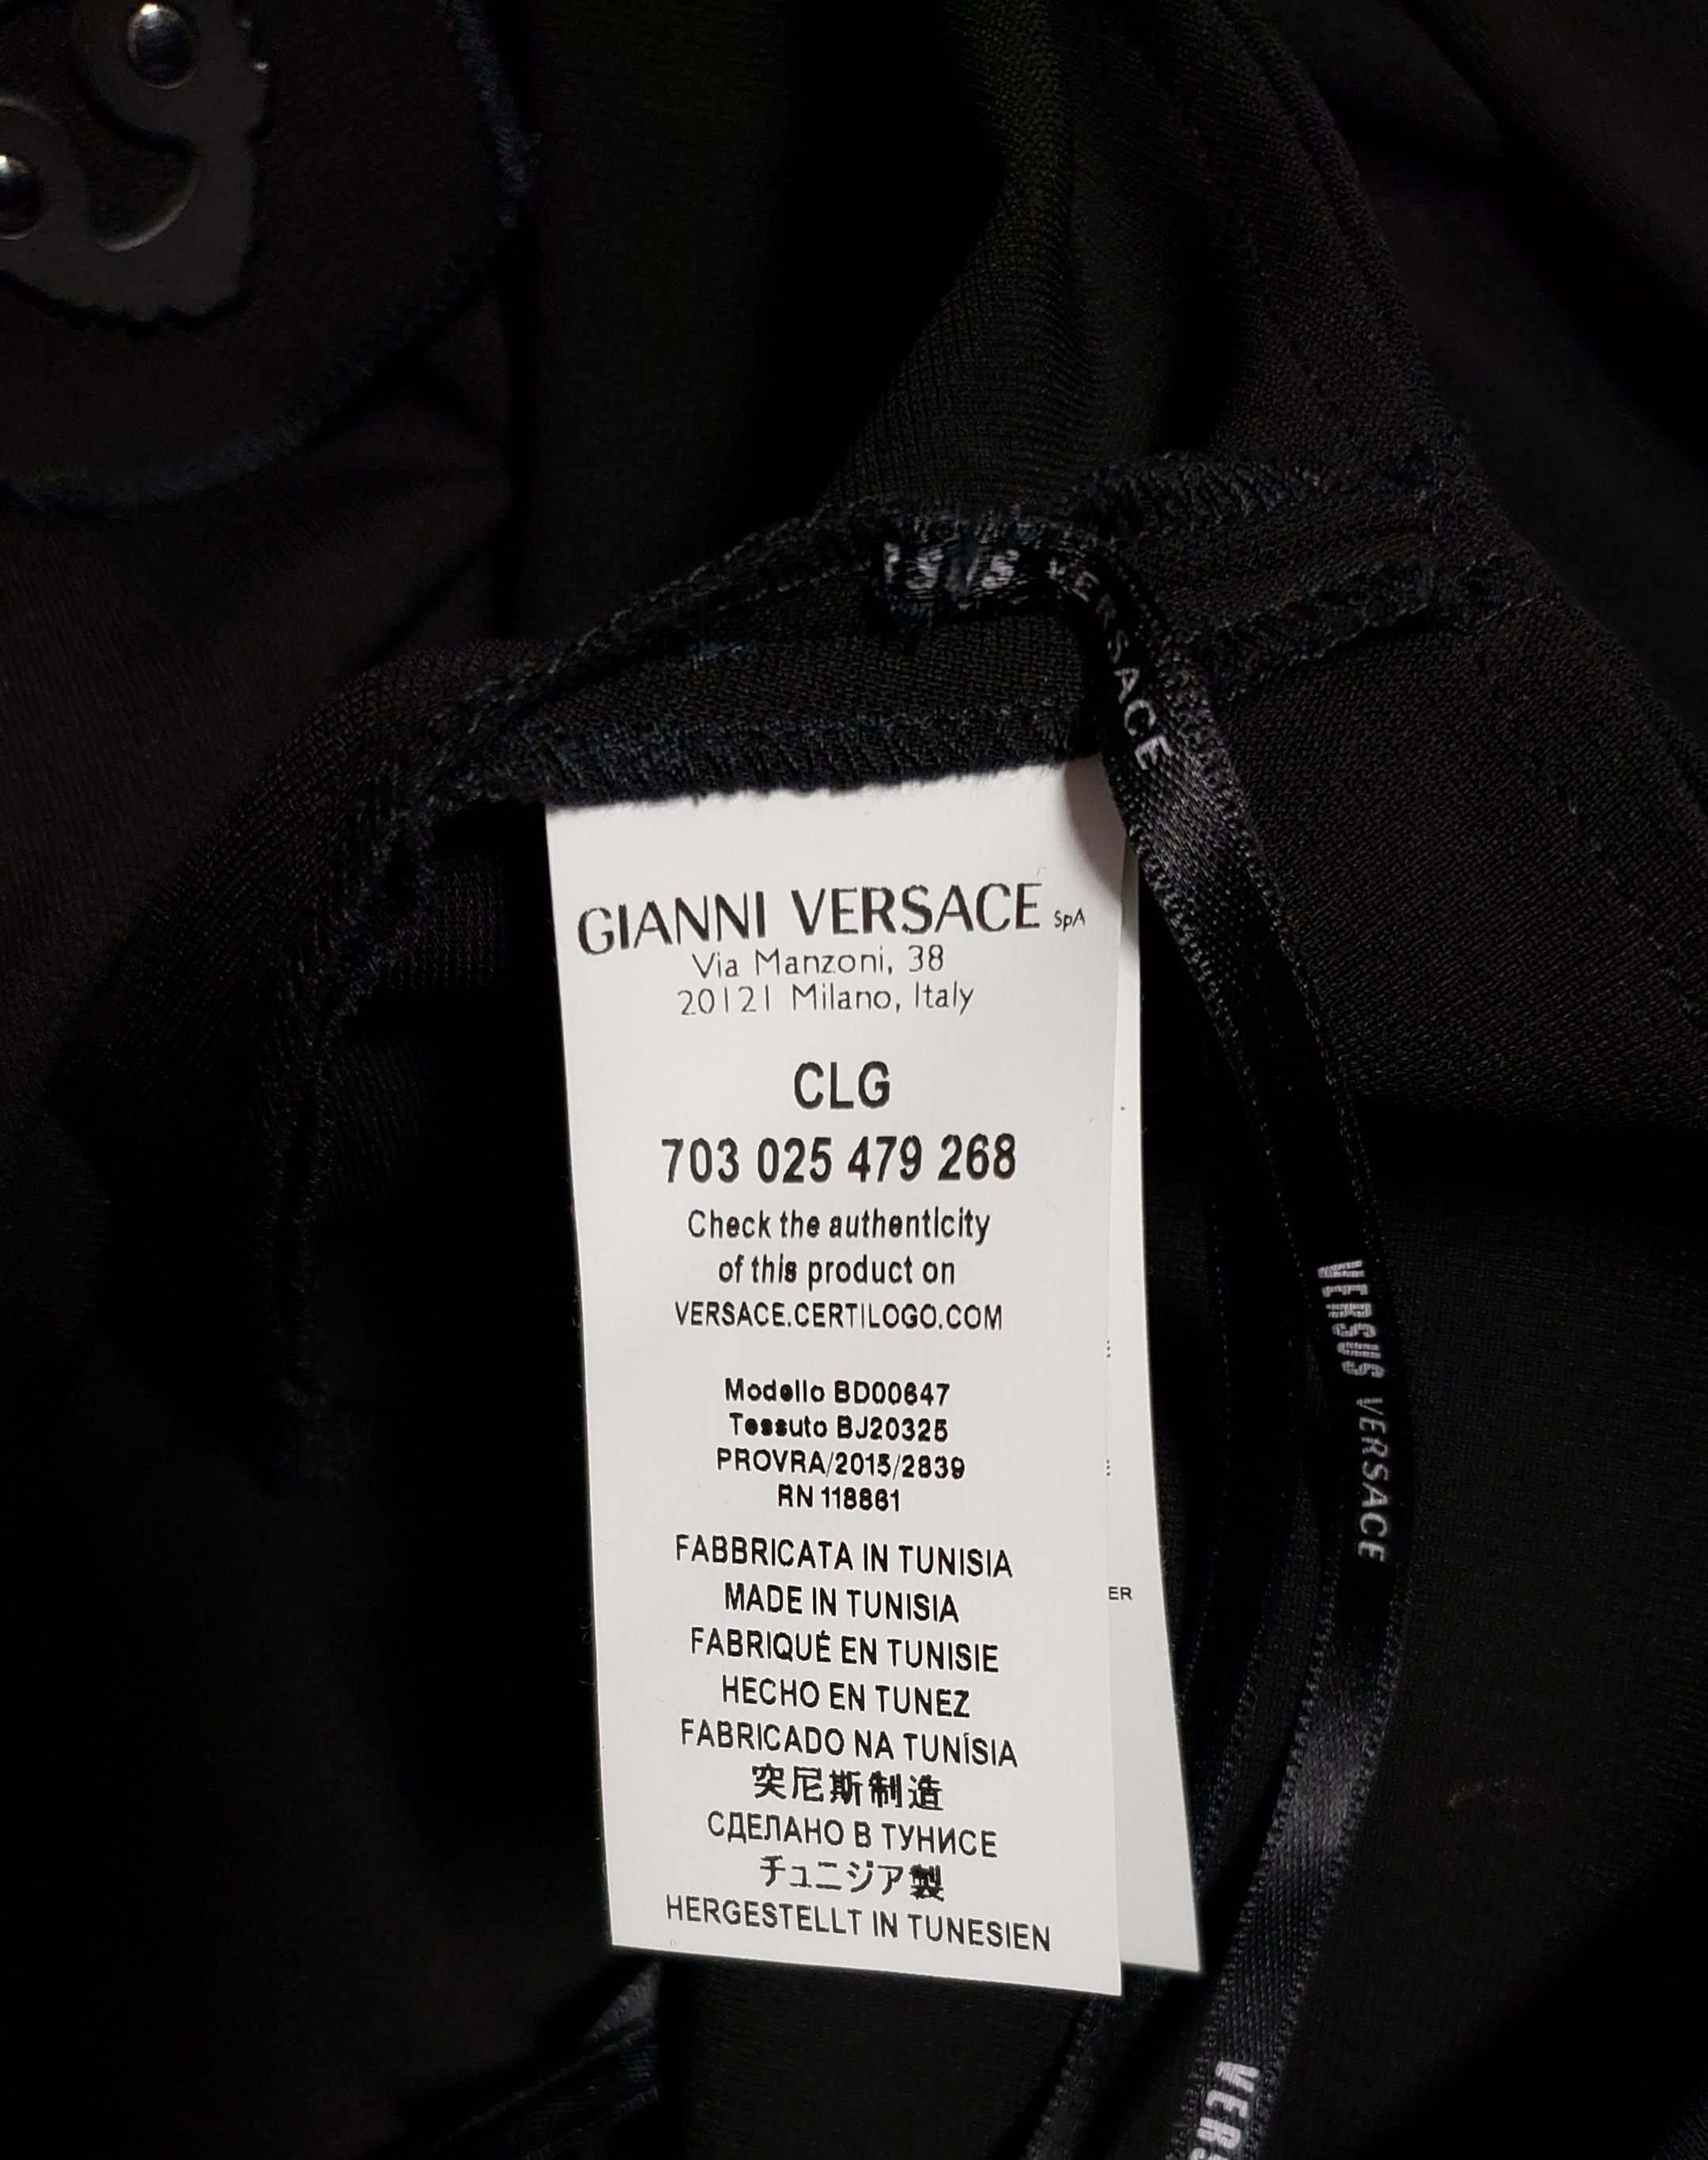 VERSUS VERSACE + ANTHONY VACCARELLO LOW-CUT BLACK Dress 44 - 8 For Sale 4